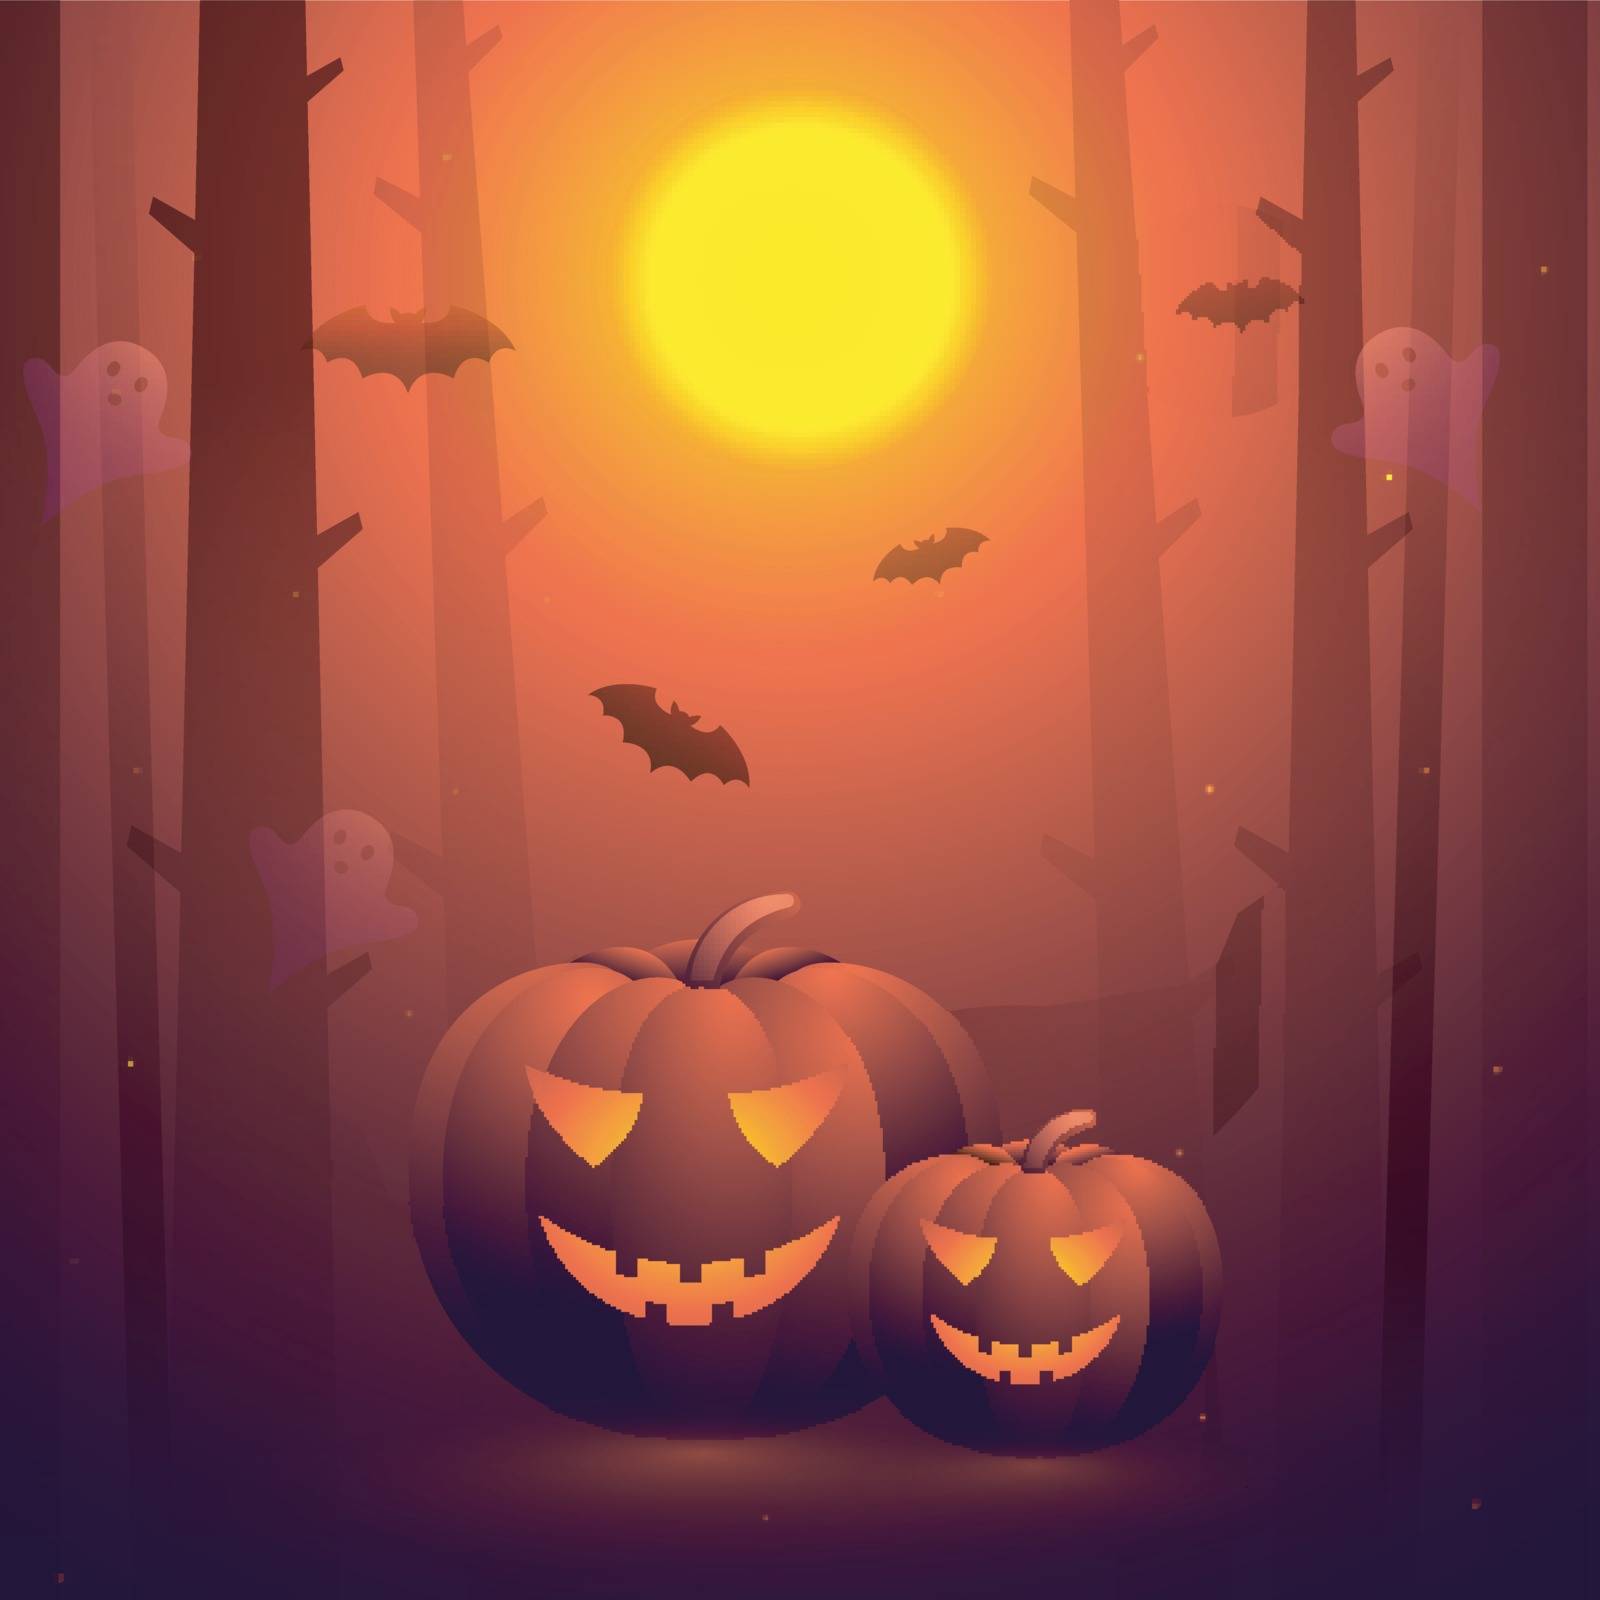 Spooky pumpkins in haunted forest on shiny full moon background by aispl